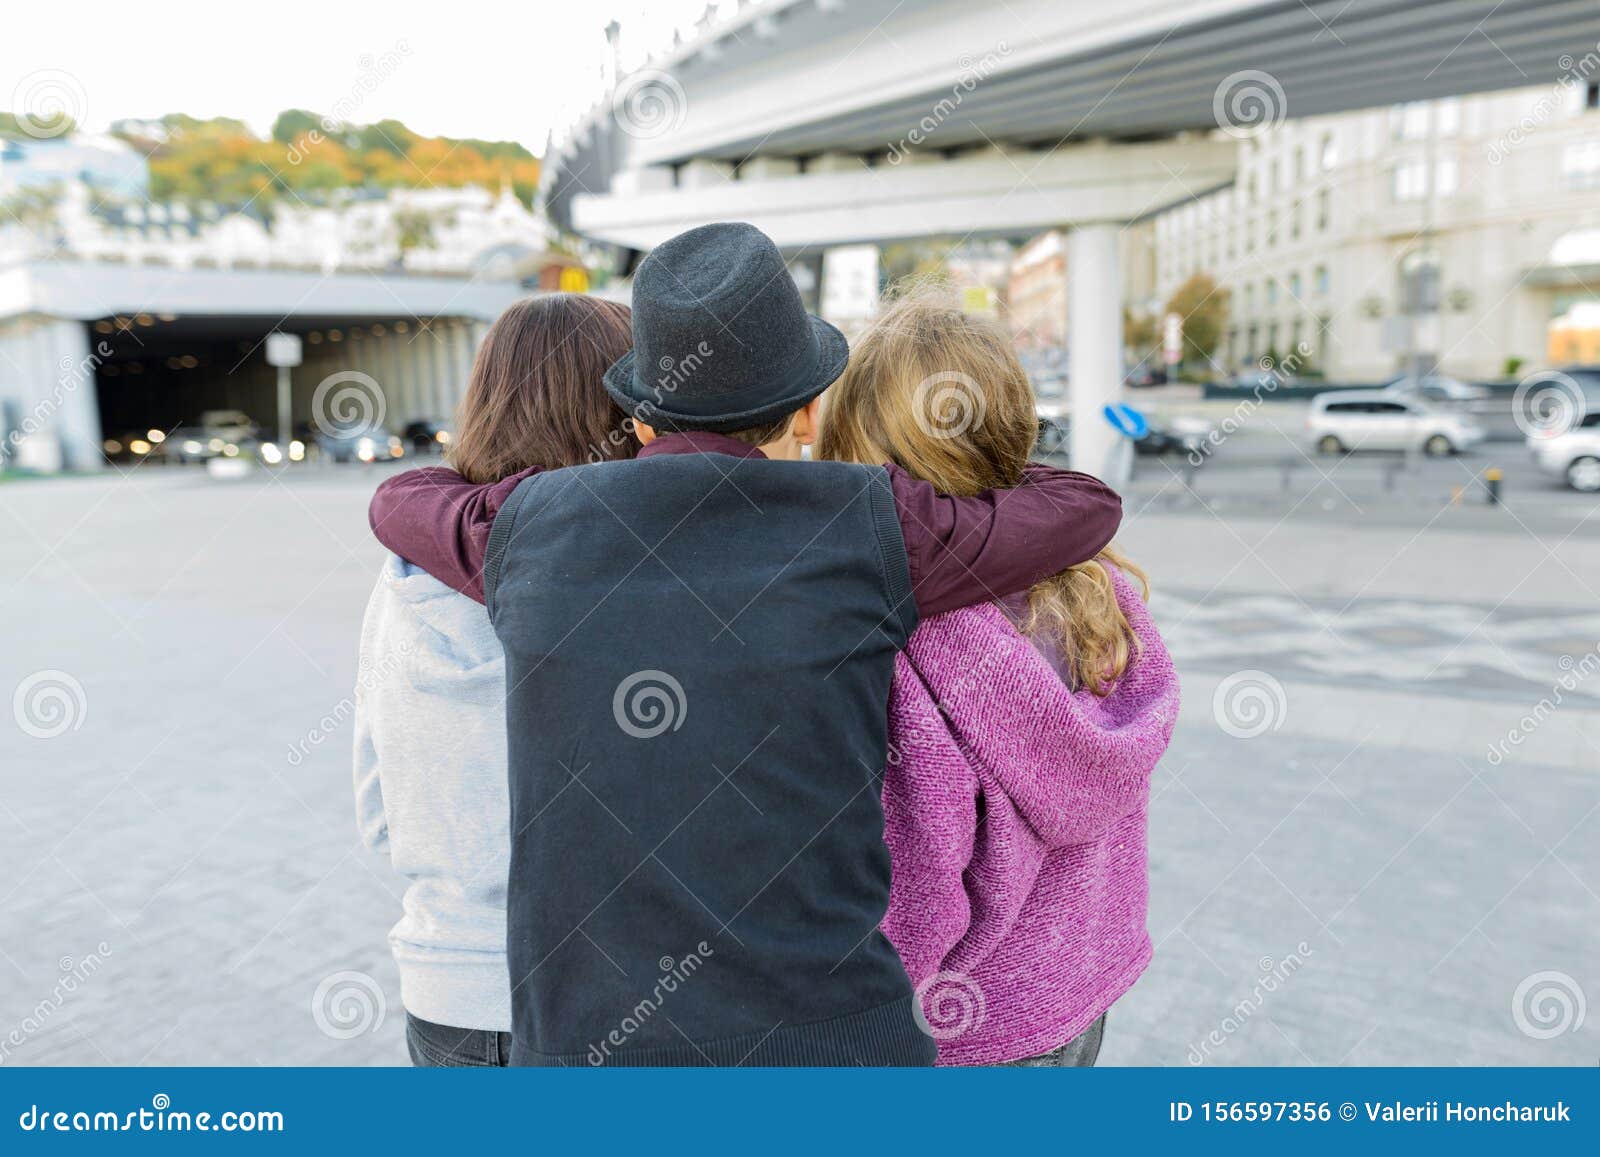 Three Friends View From The Back Of Boy Hugging Two Girls Stock Photo